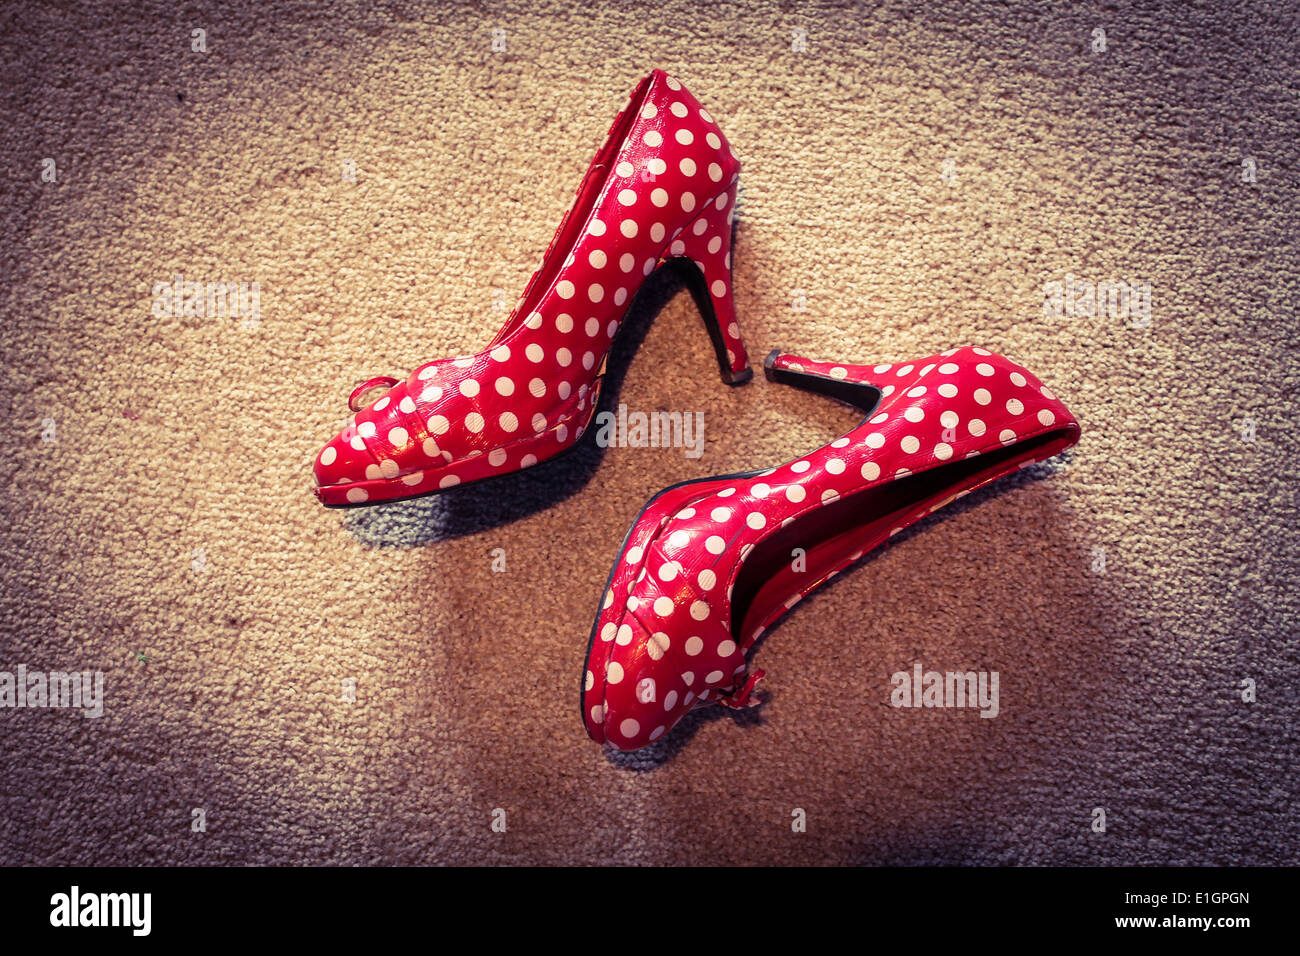 Red polka dot high heel shoes kicked off after a party Stock Photo